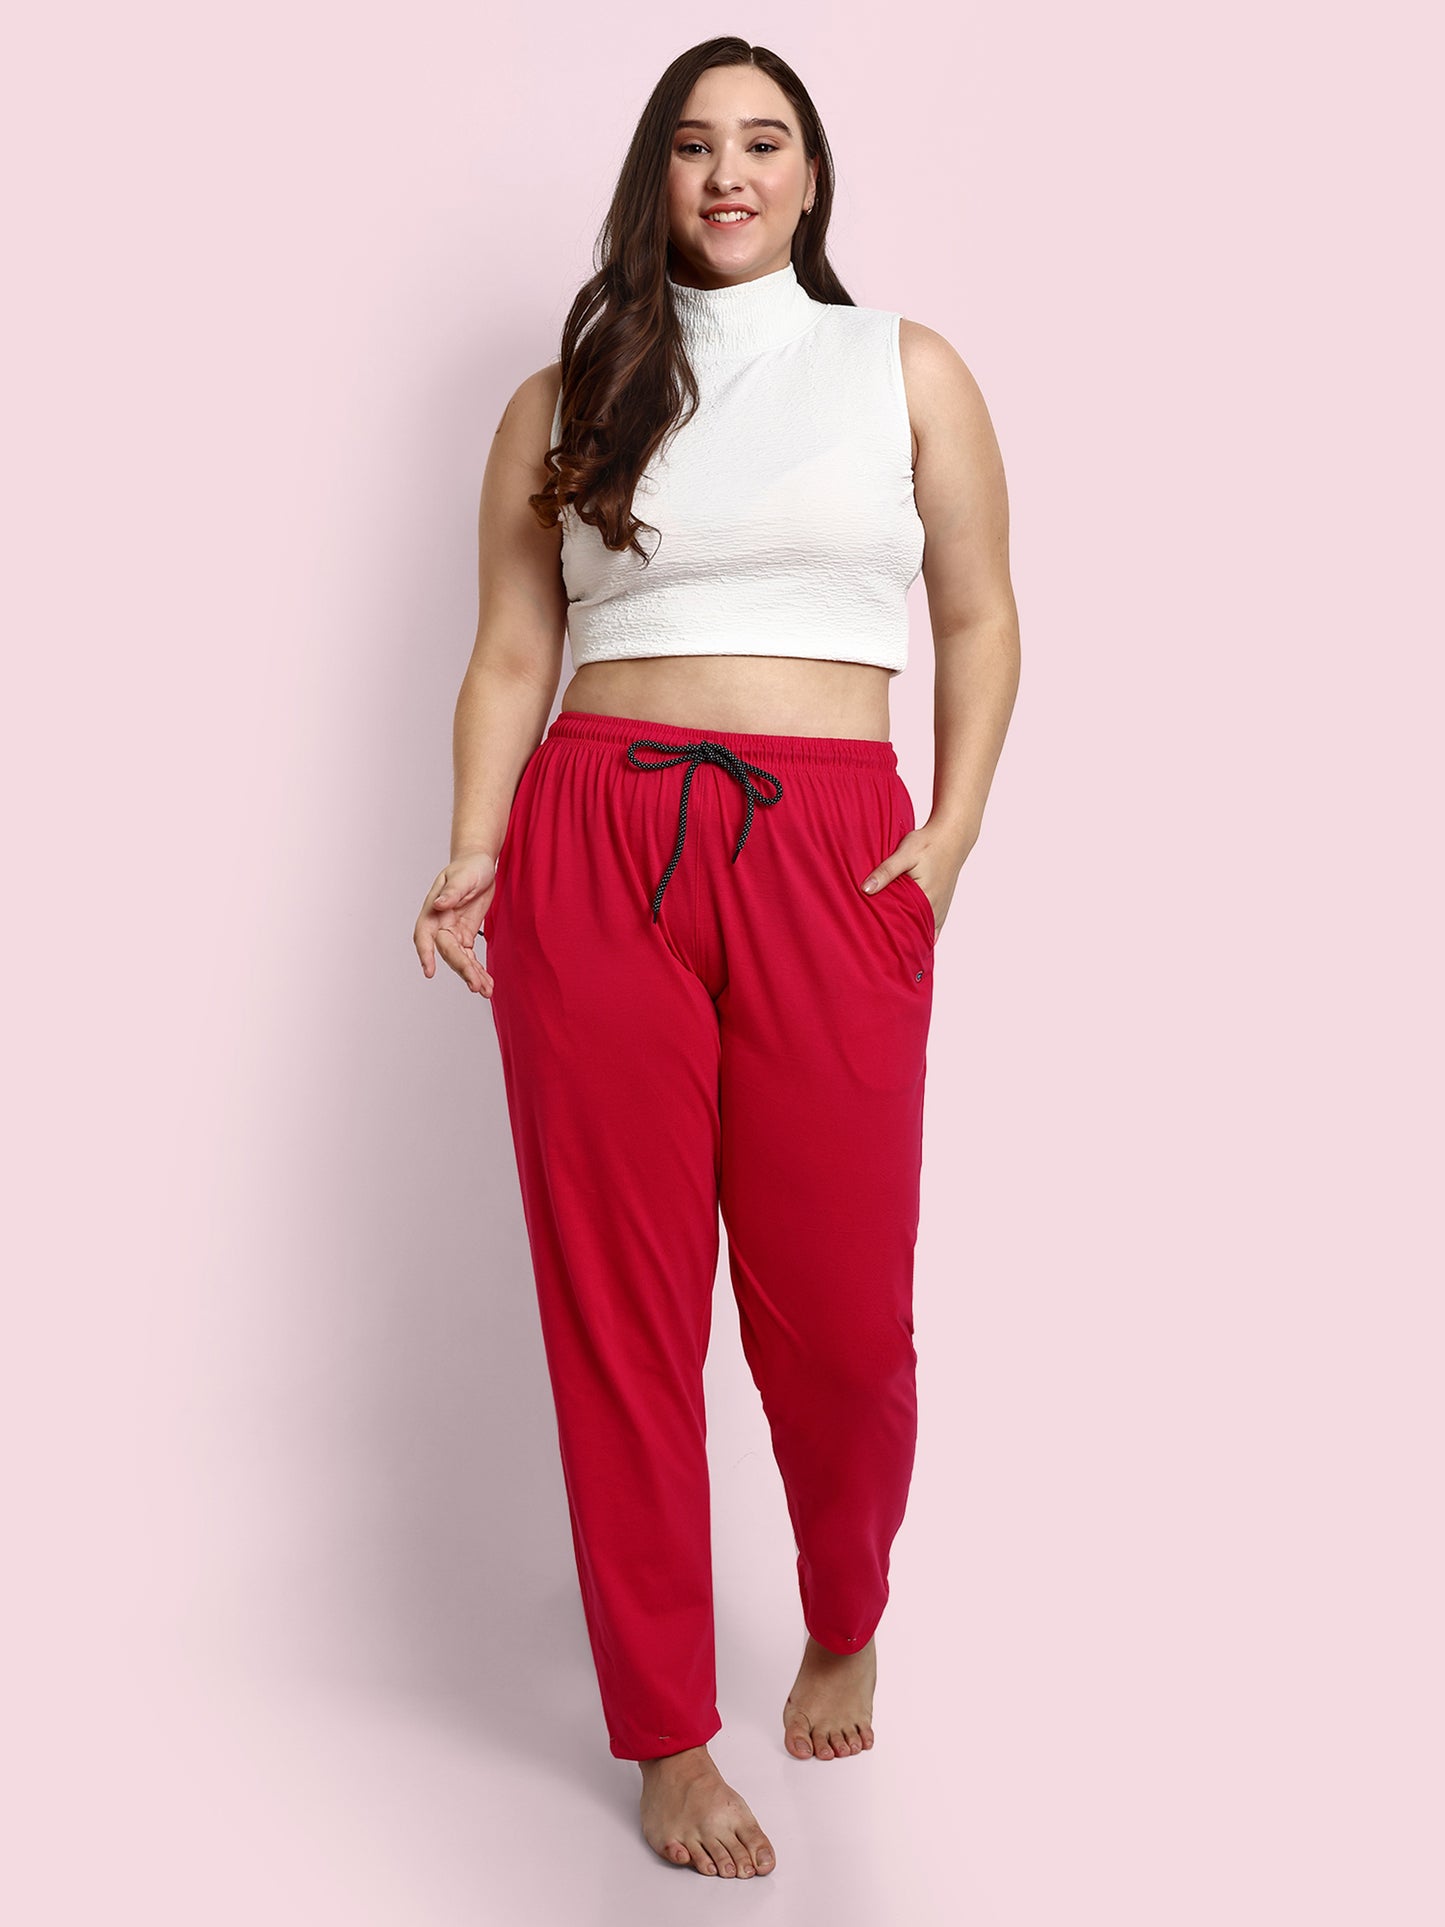 Comfy Pink Cotton Track Pants For Women At Best Prices